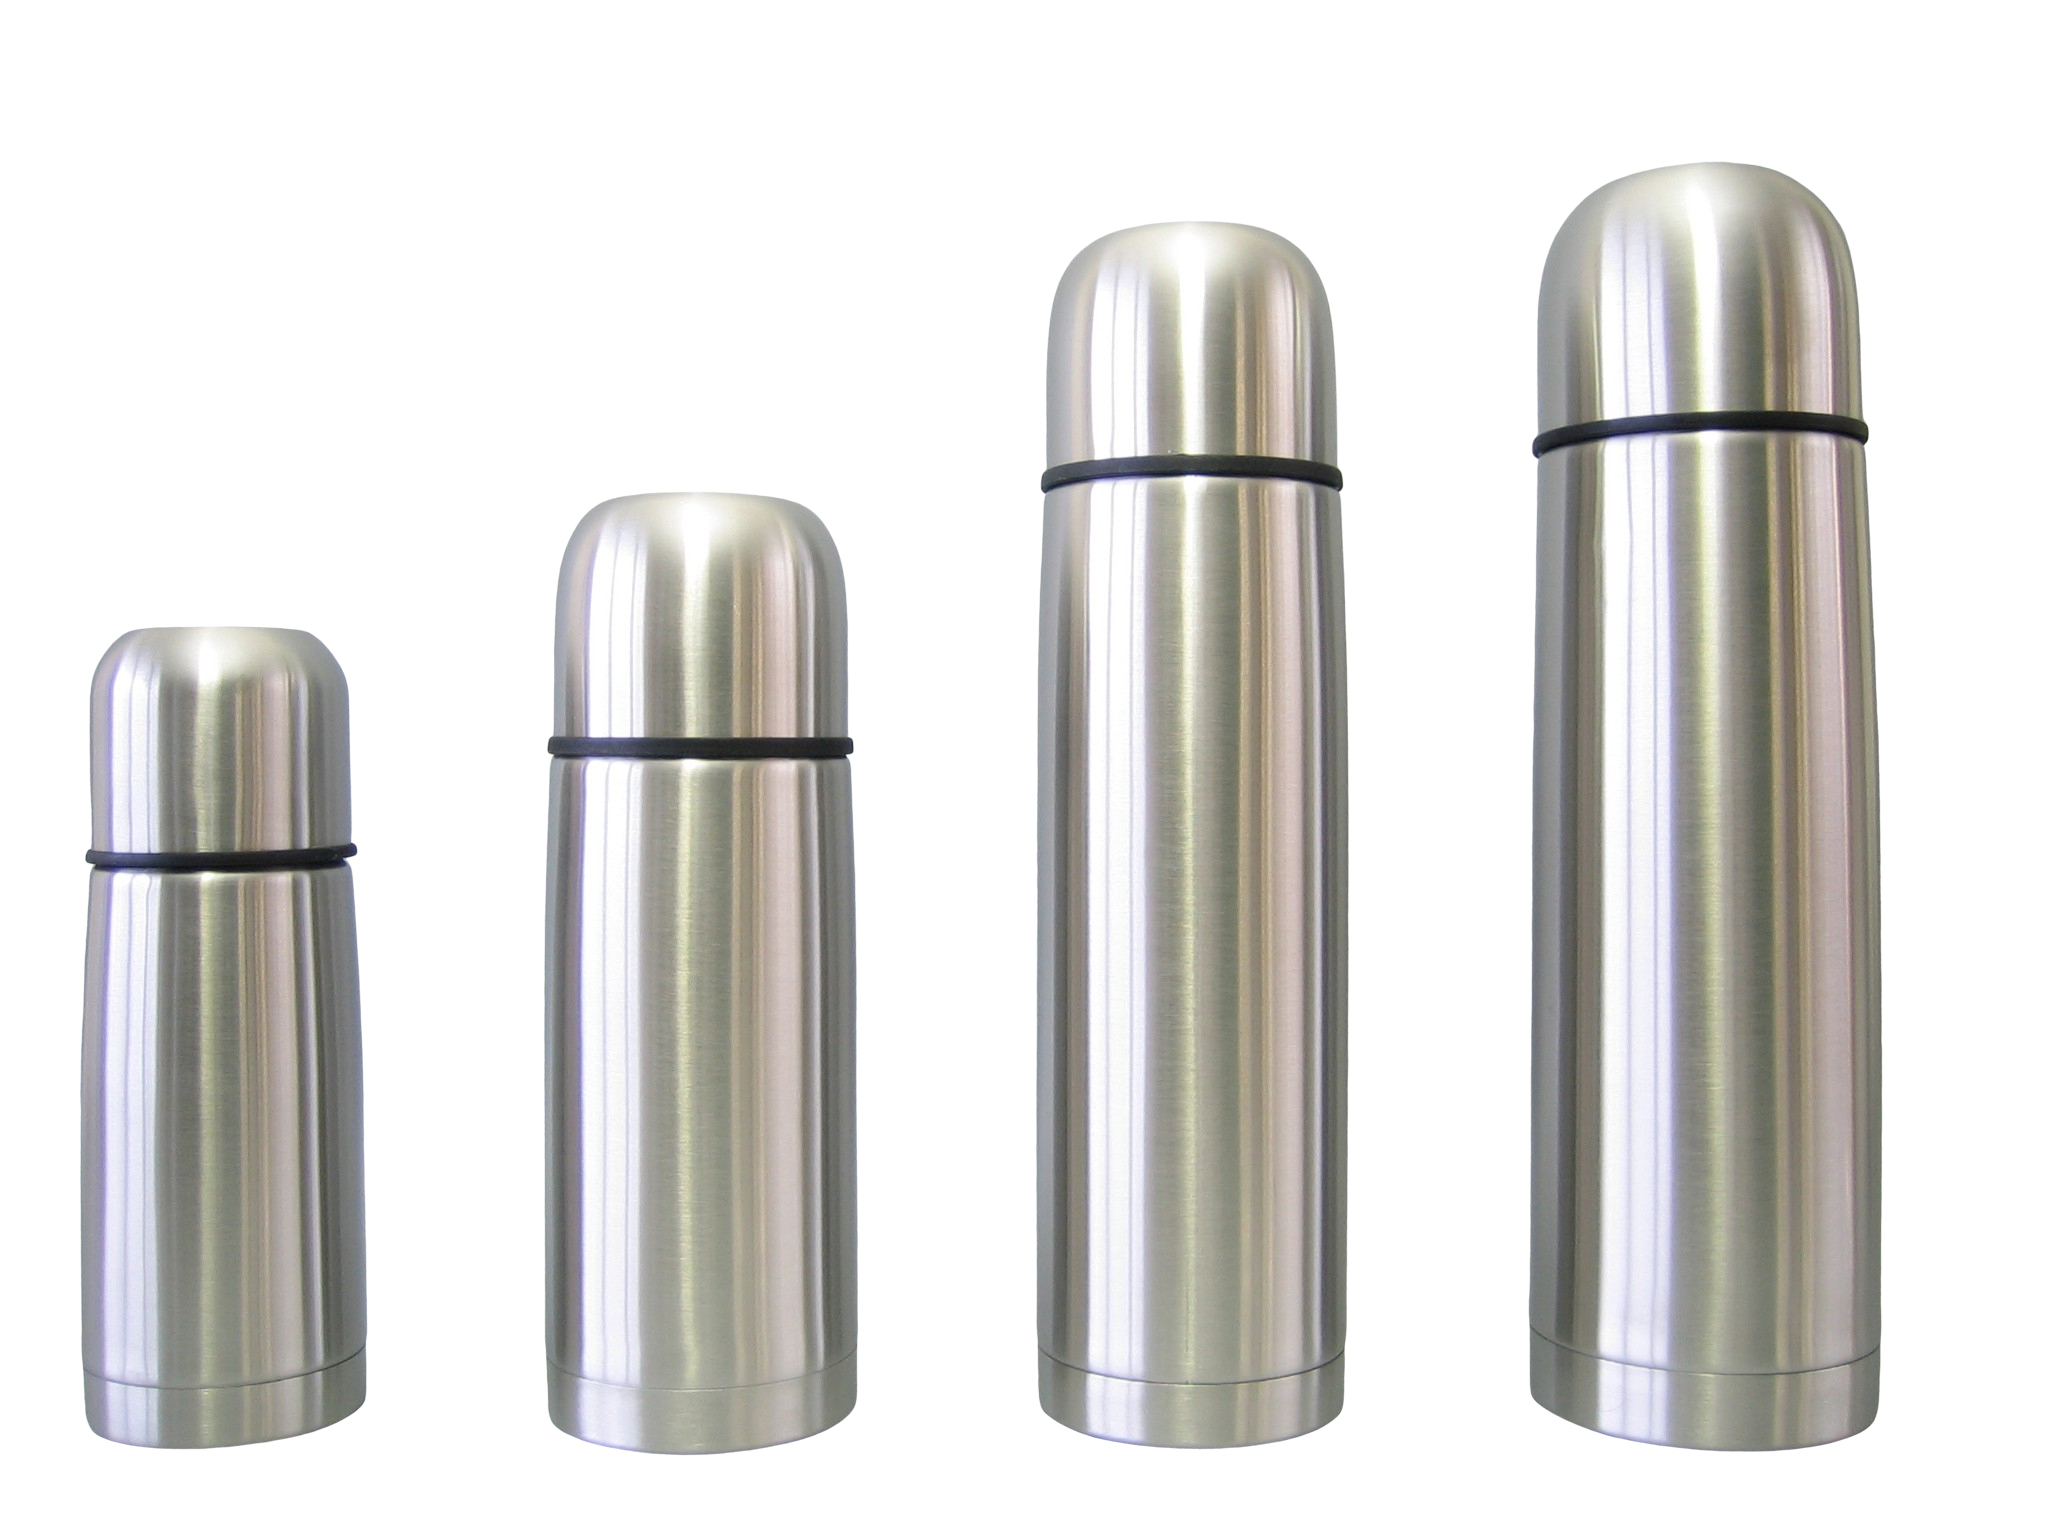 TSS03-S03 - Vacuum flask SS unbreakable 0.30 L (click stop) - Isobel Silver Line